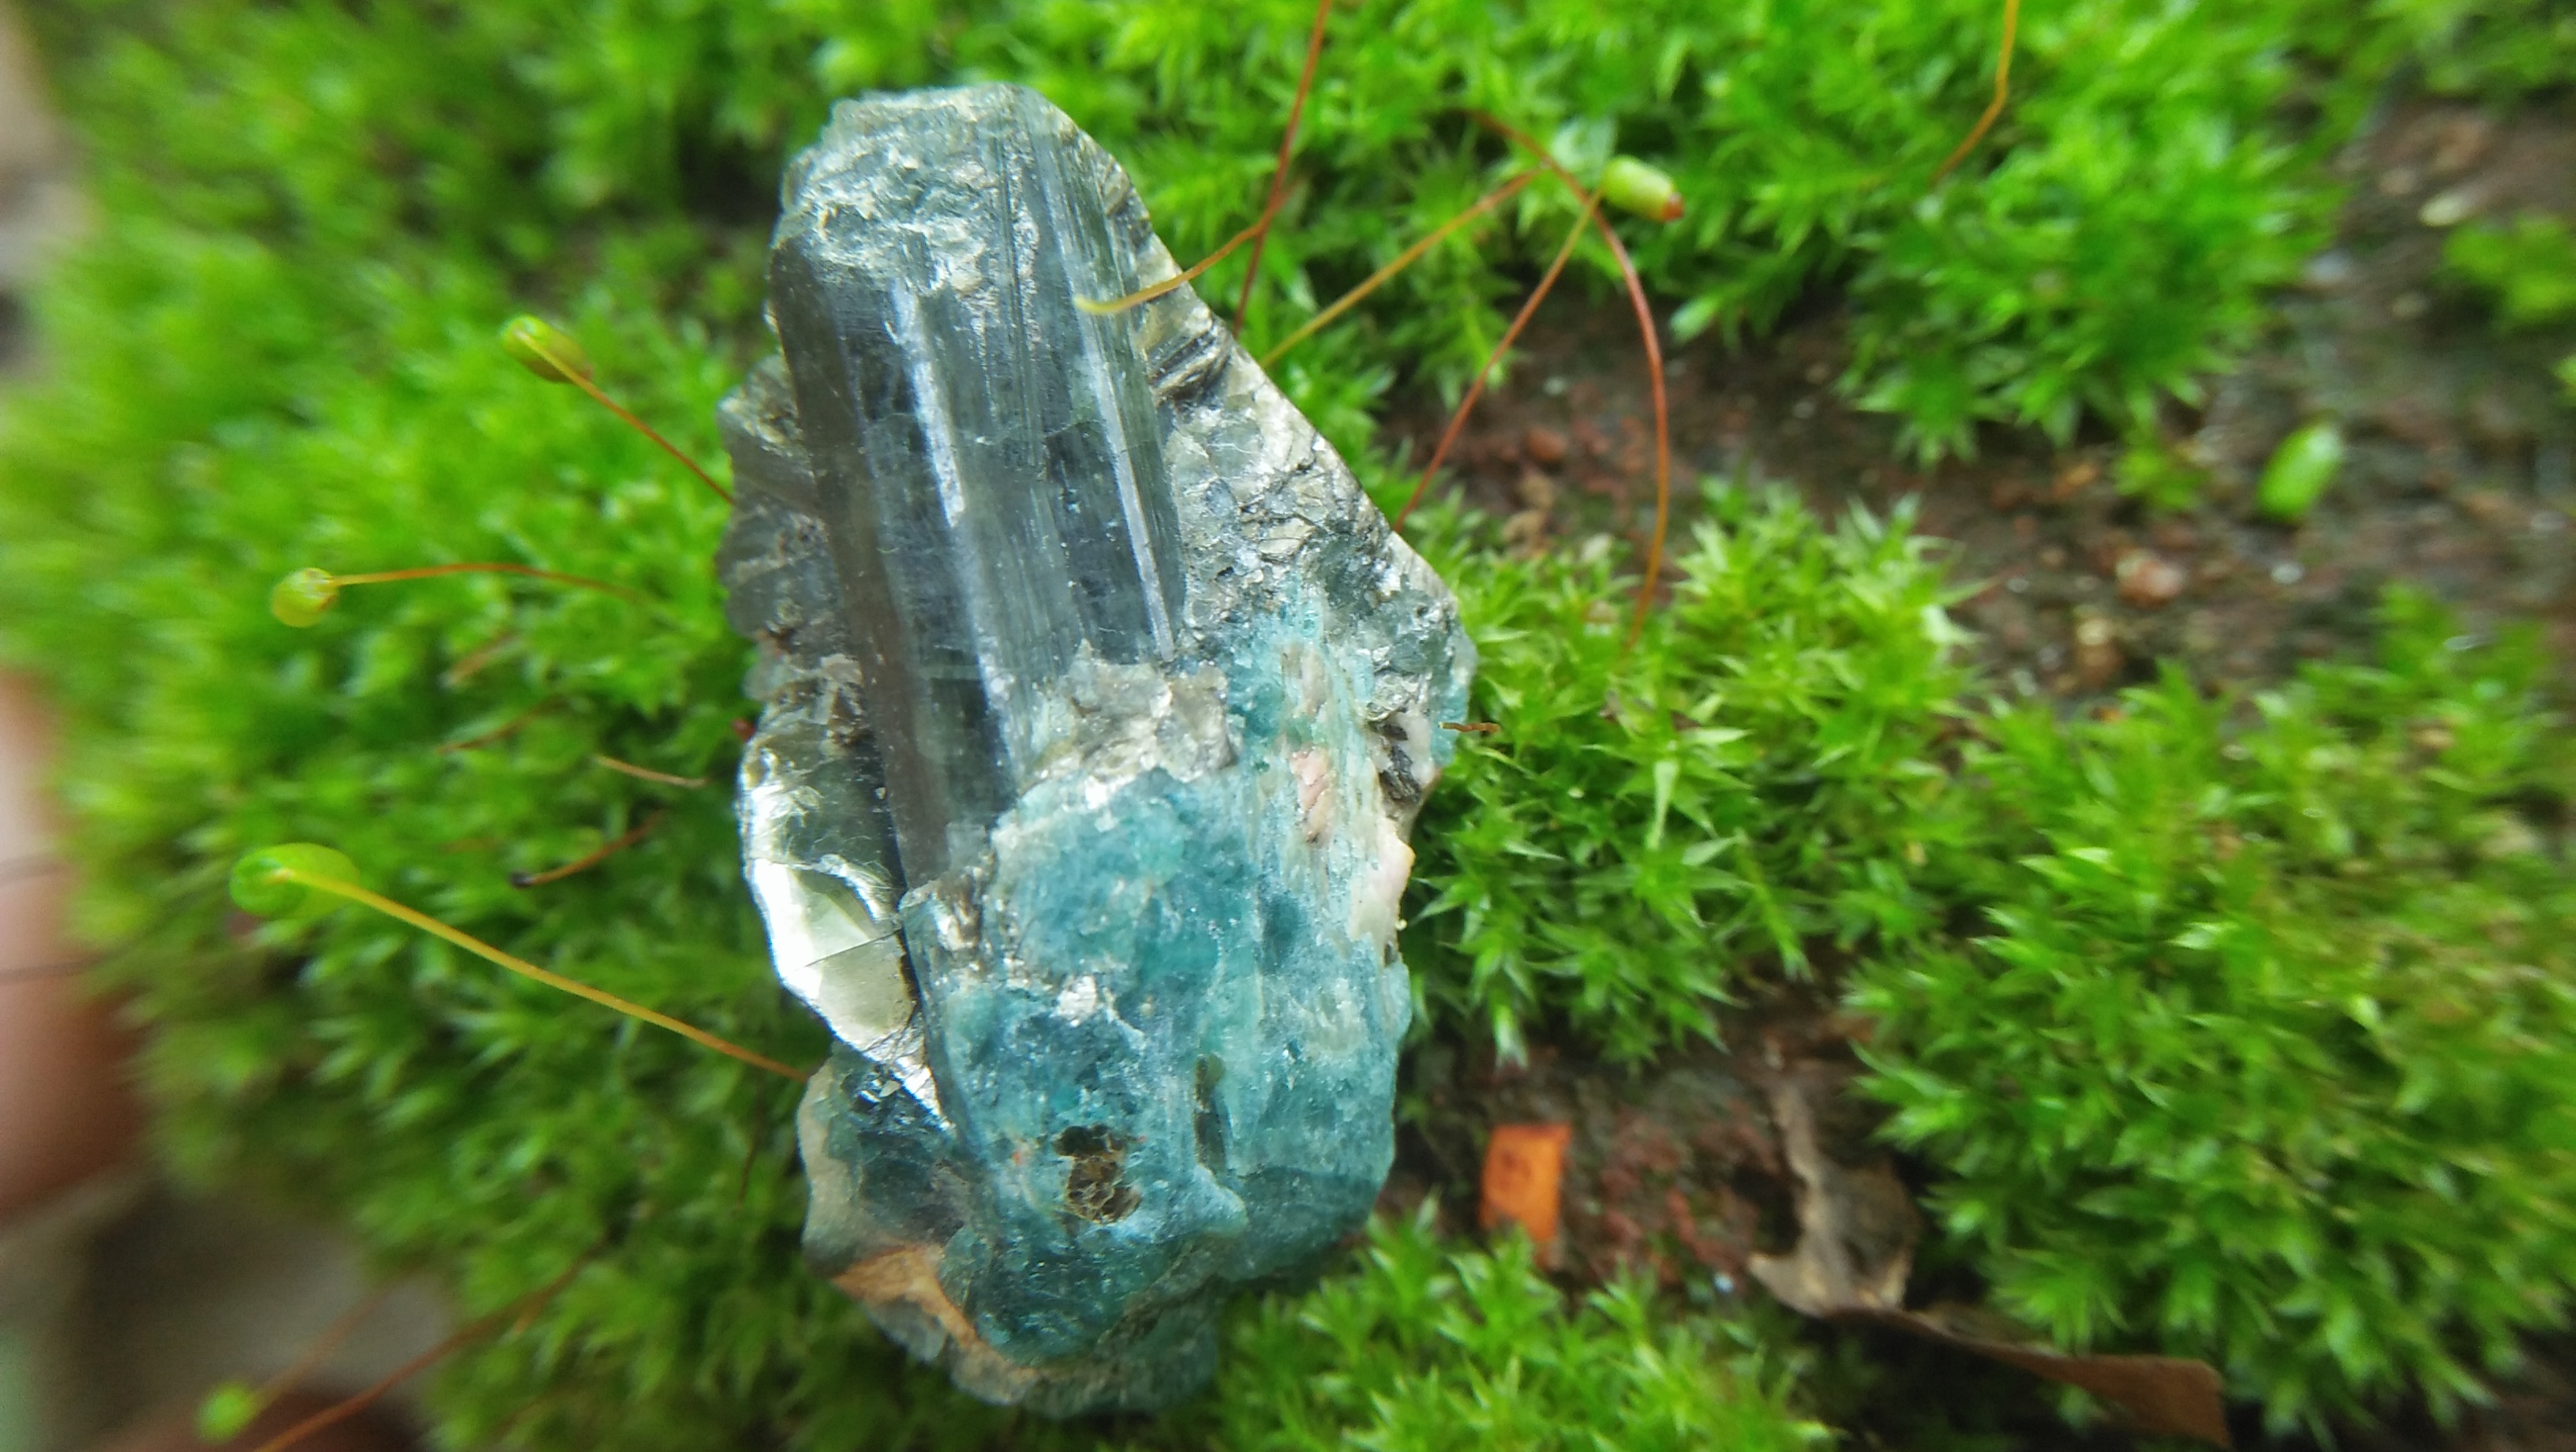 Extremely Rare Gemstone - Natural Grandidierite Grandidierite is an extremely rare mineral and gem that was first discovered in 1902 in southern Madagascar. Grandidierite is nesosilicates mineral with the chemical formula (Mg, Fe2+)(Al, Fe3+)3(SiO4)(BO3)O2.                                                                  It is found colors such as Bluish-green, greenish-blue with 7½ hardness according to the more hardness scale. Grandidierite can be seen Vitreous, Pearly luster stones with 2.98 - 2.99 Specific Gravity. This gemstone was named in honor of French explorer Alfred Grandidier who studied the natural history of Madagascar. He is a French explorer and Naturalist. Grandidierite has very strong dispersion and Visible Pleochroism, It is a Nesosilicates orthorhombic Mineral with Biaxial (-) Optical Properties. Inside of grandidierite mostly can be seen very perfect cleavages. As an optical properties, it has a 1.583 - 1.639 refractive index. Grandidierite can be found in India, Germany, Denmark, Malawi, Namibia, India, Norway, and Sri Lanka. Grandidierite's main source is Madagascar. Healing Properties of Grandidierite Grandidierite is a blue gemstone that promotes spiritual awakening, peace, and tranquility and can encourage you to communicate in a calm and clear manner.